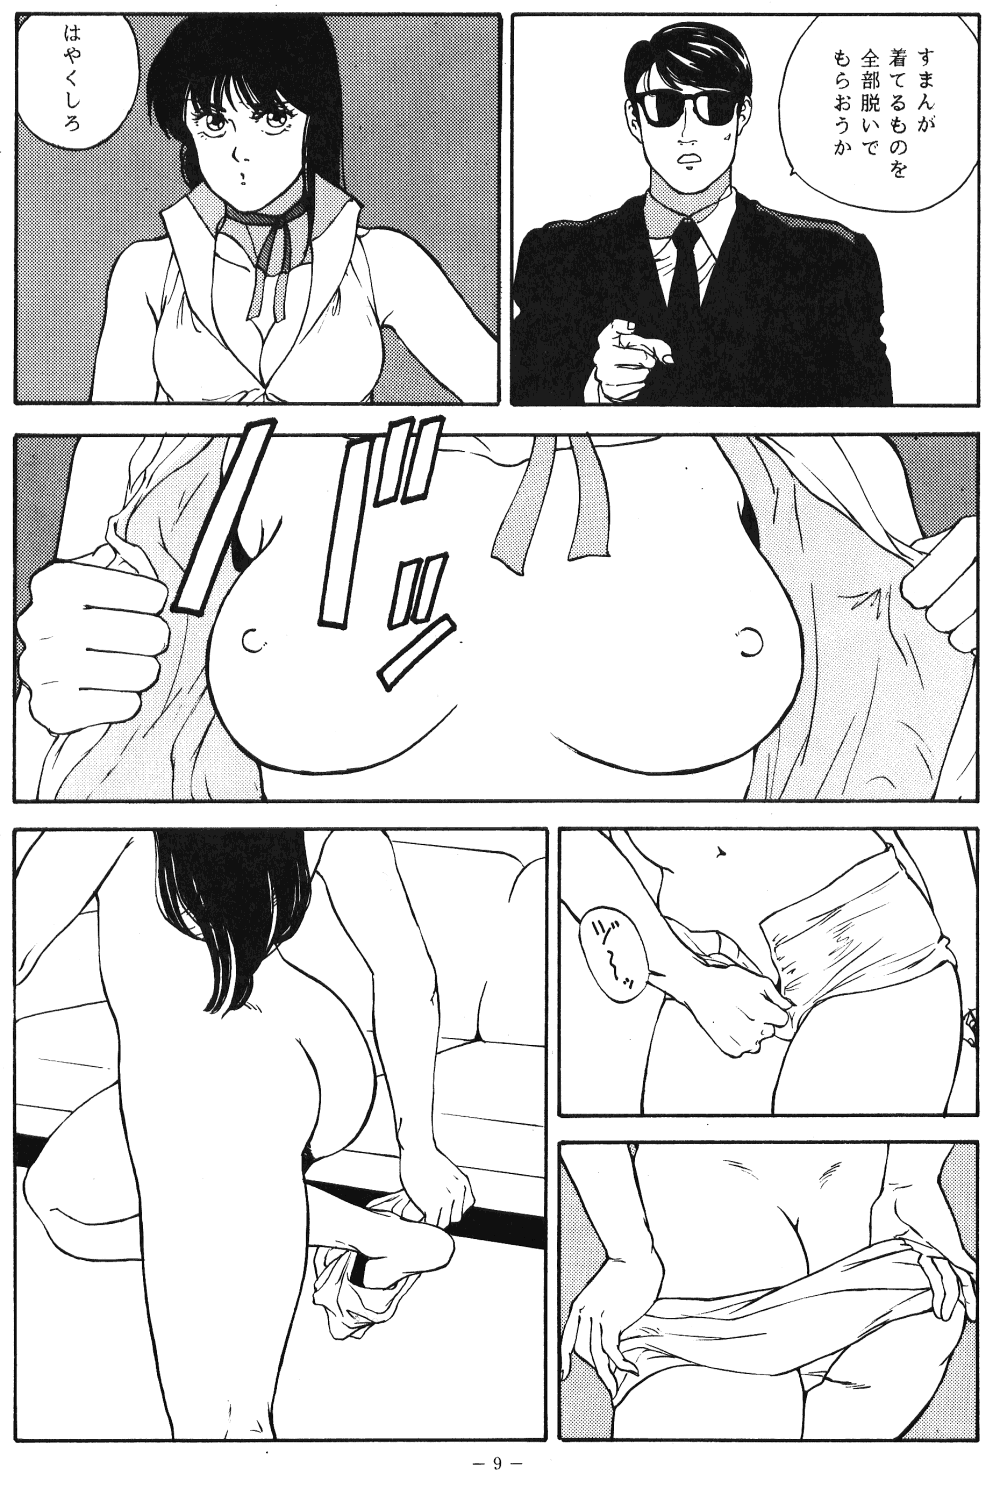 [ALPS (Various)] LOOK OUT 21 (Various) page 8 full